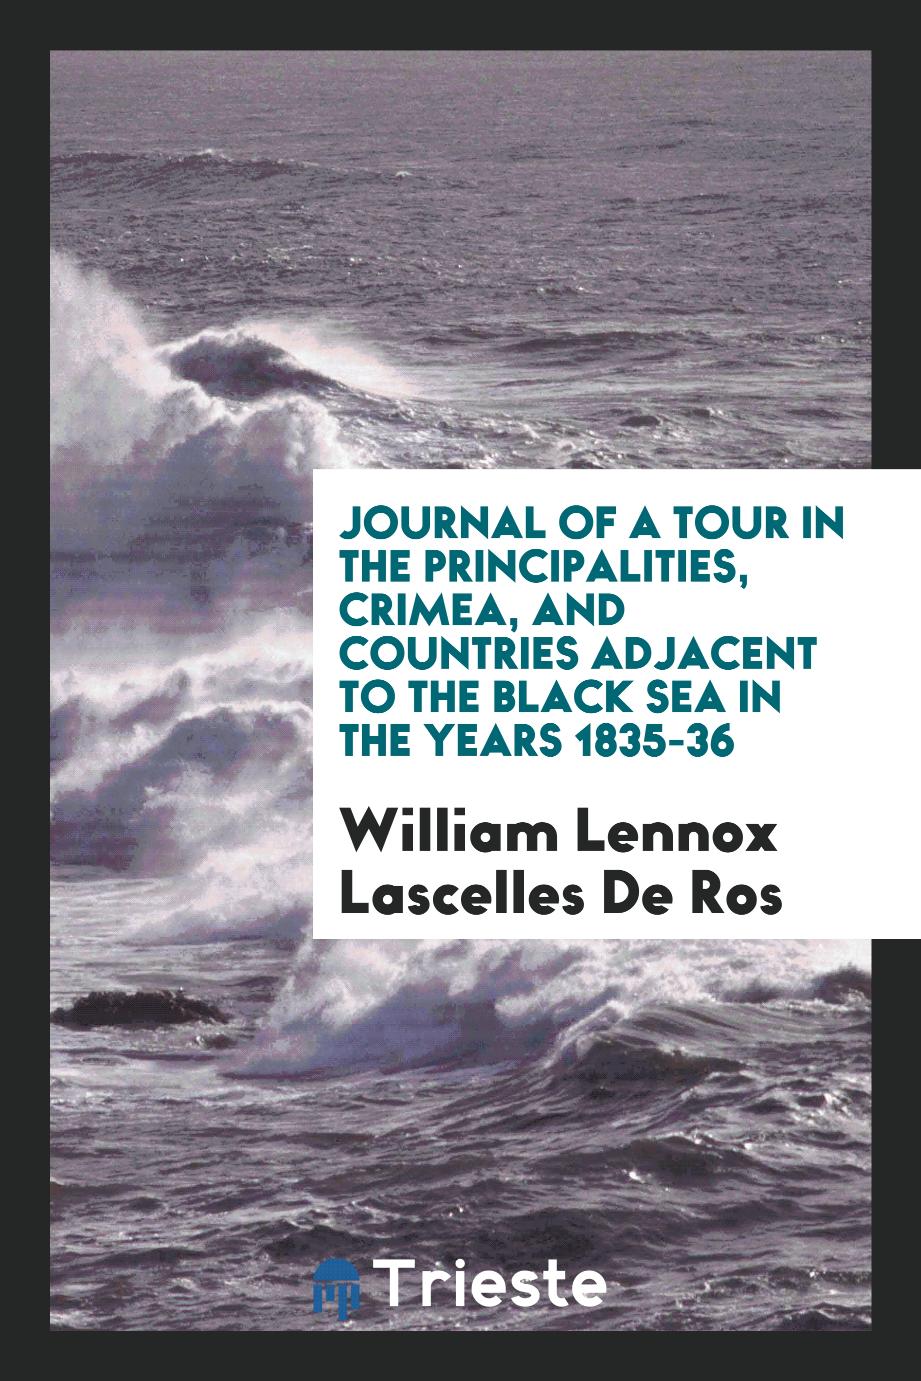 Journal of a Tour in the Principalities, Crimea, and Countries Adjacent to the Black Sea in the Years 1835-36